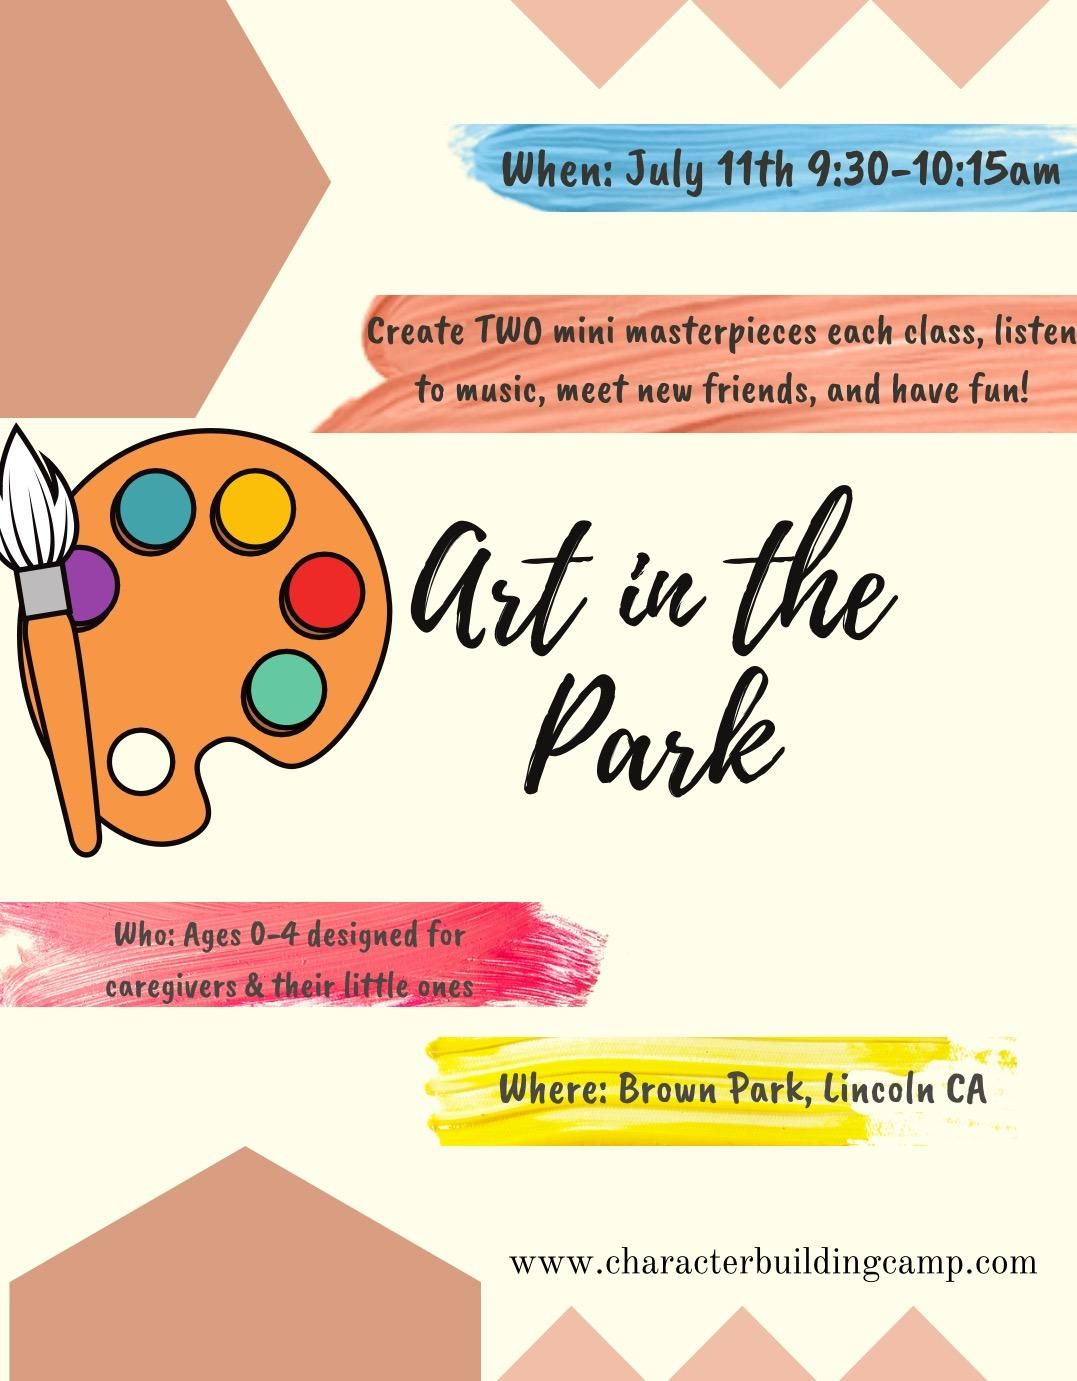 Mommy and Me Art in the Park- JULY 11th- Brown Park Lincoln, CA